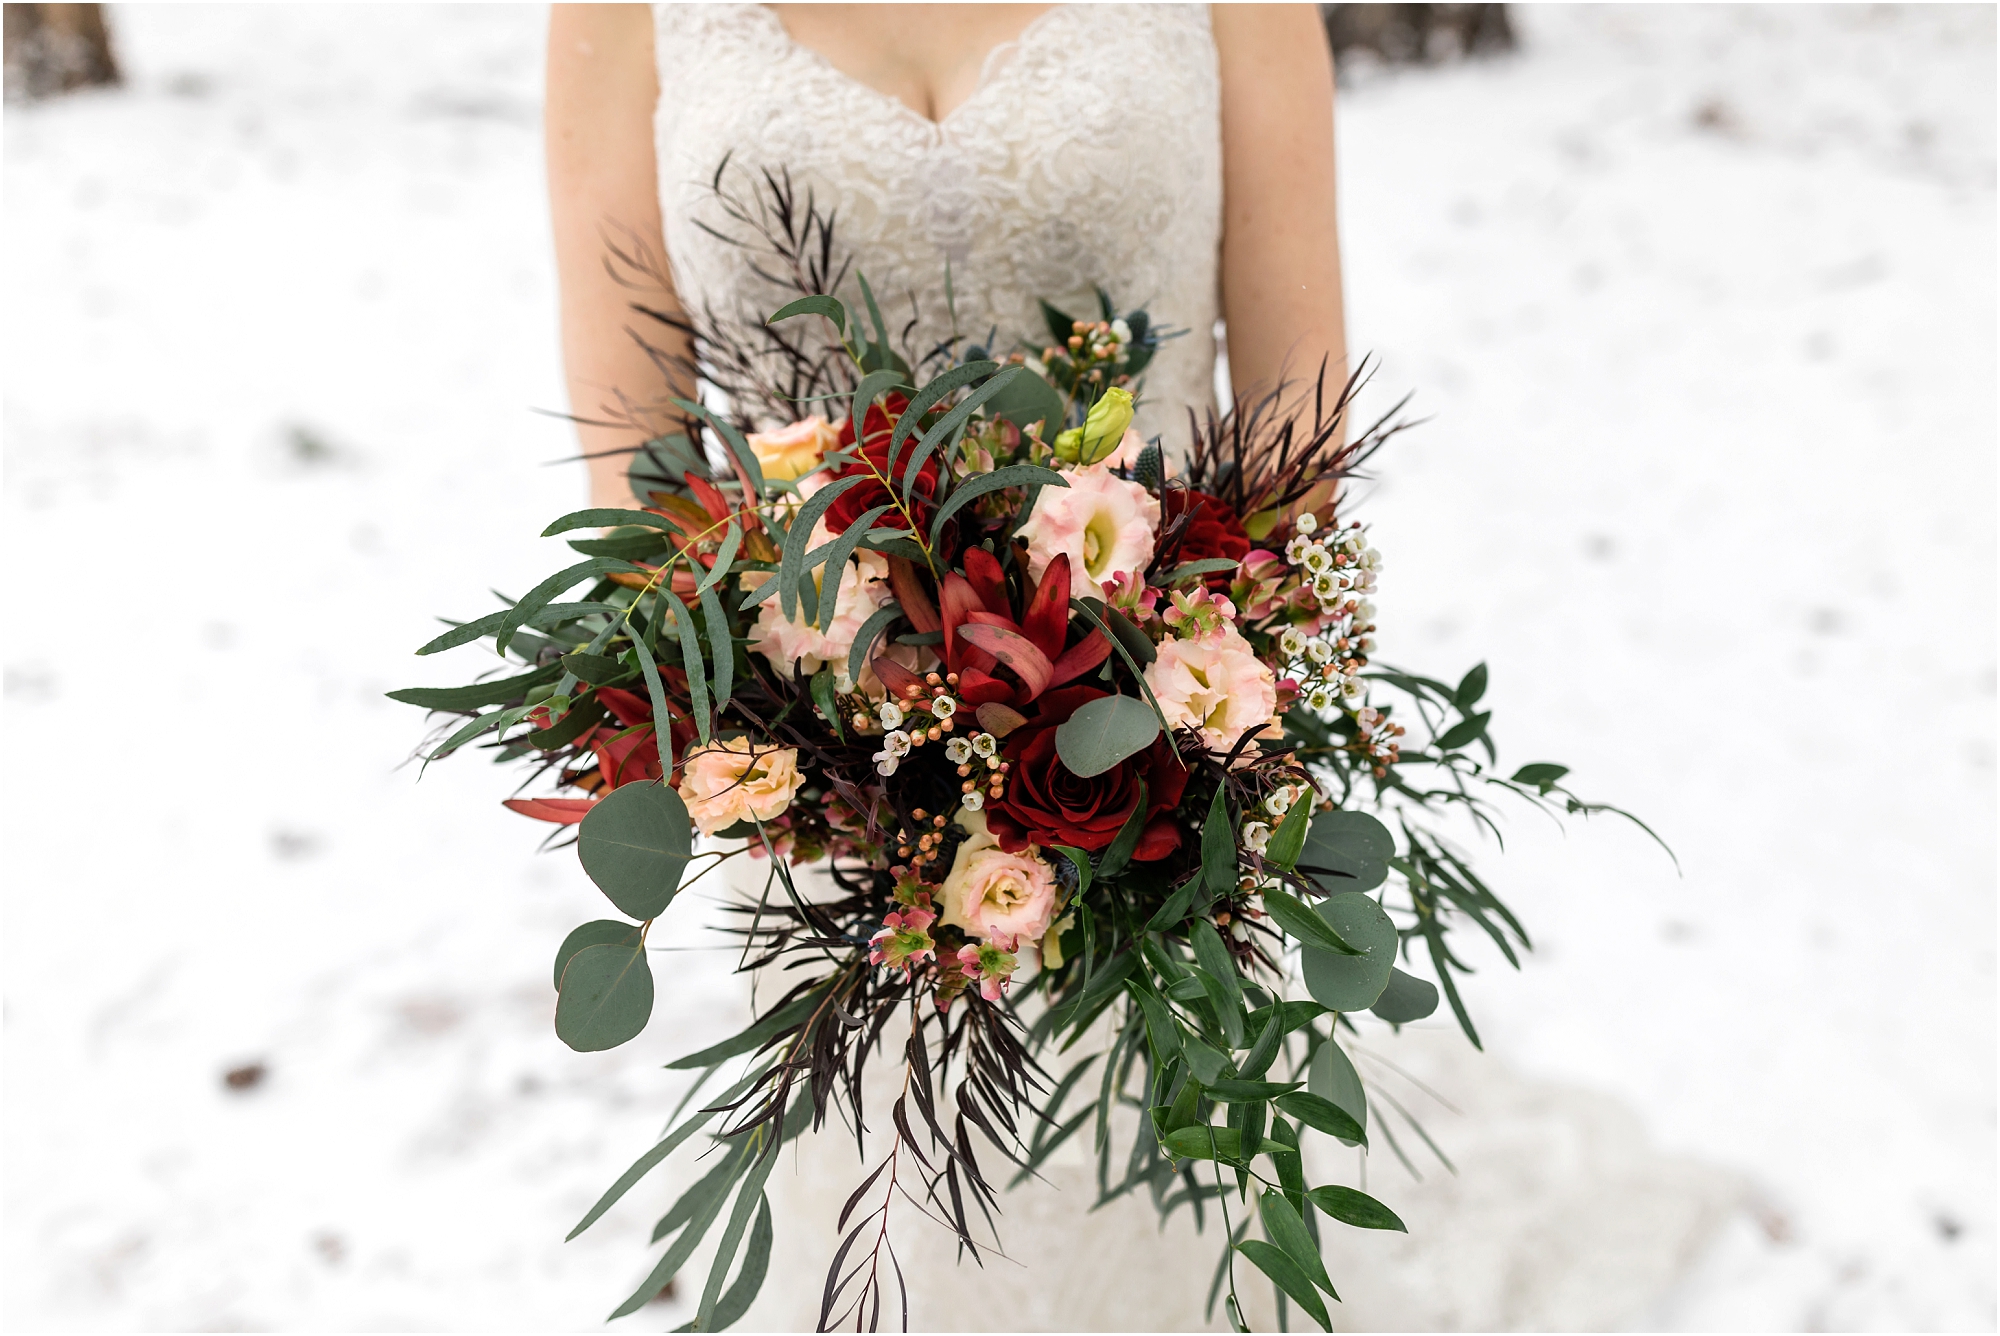 A gorgeous bouquet or red and pink roses and greenery from Woodland Floral in Sisters for this gorgeous Central Oregon winter elopement bride. | Erica Swantek Photography